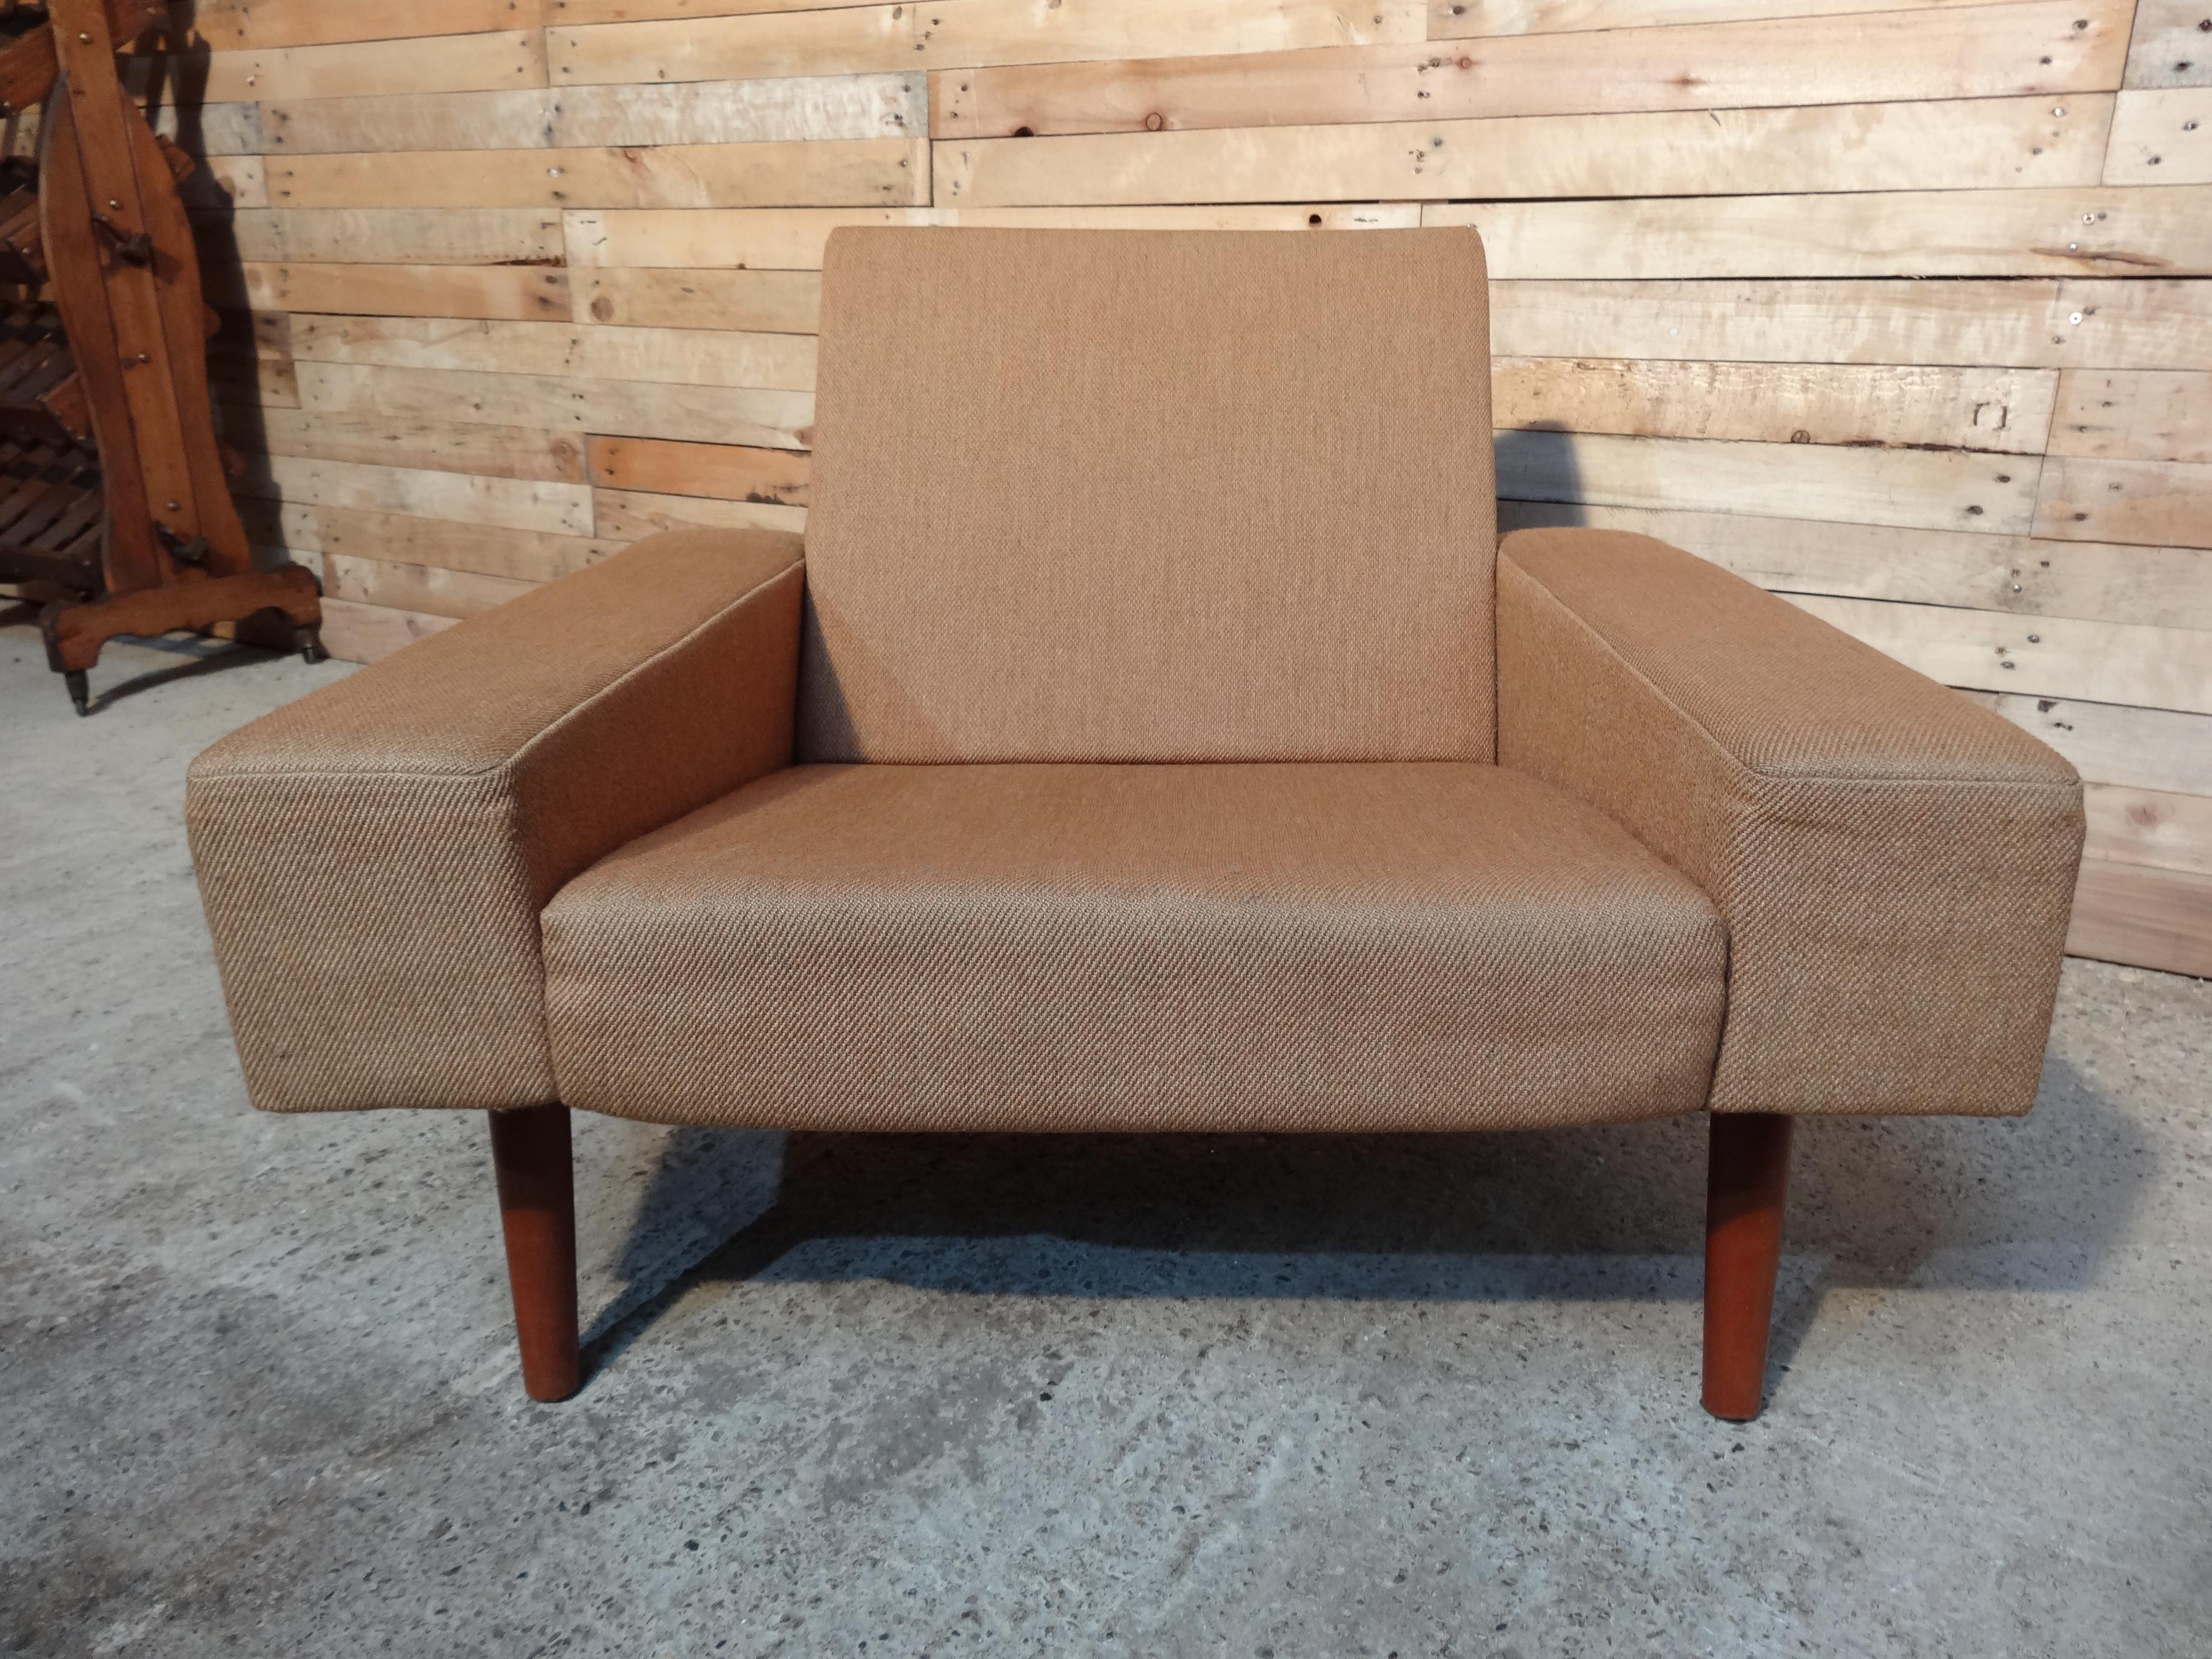 Classic design totally original retro 1950 Danish fabric armchair

This wooden base fabric 1950s armchair is in good vintage condition. 

Measures:
Seat height: 35cm, Height: 66cm, Depth: 80cm, Width: 85cm.